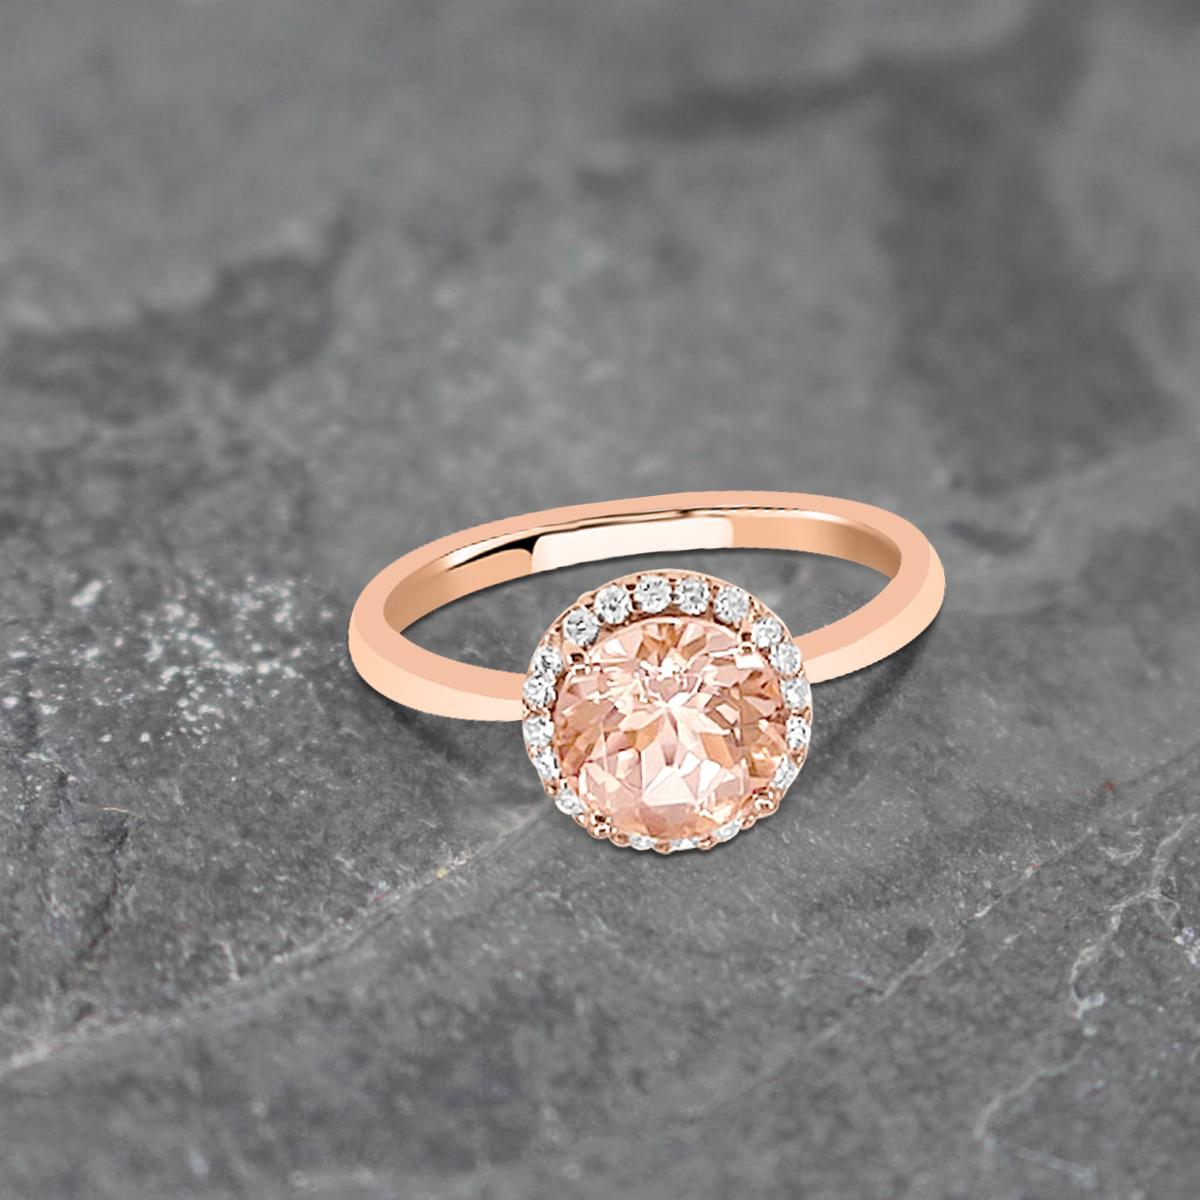 Modern 14K Rose Gold 0.82cts Morganite and Diamond Ring, Style# TS1079MOR For Sale